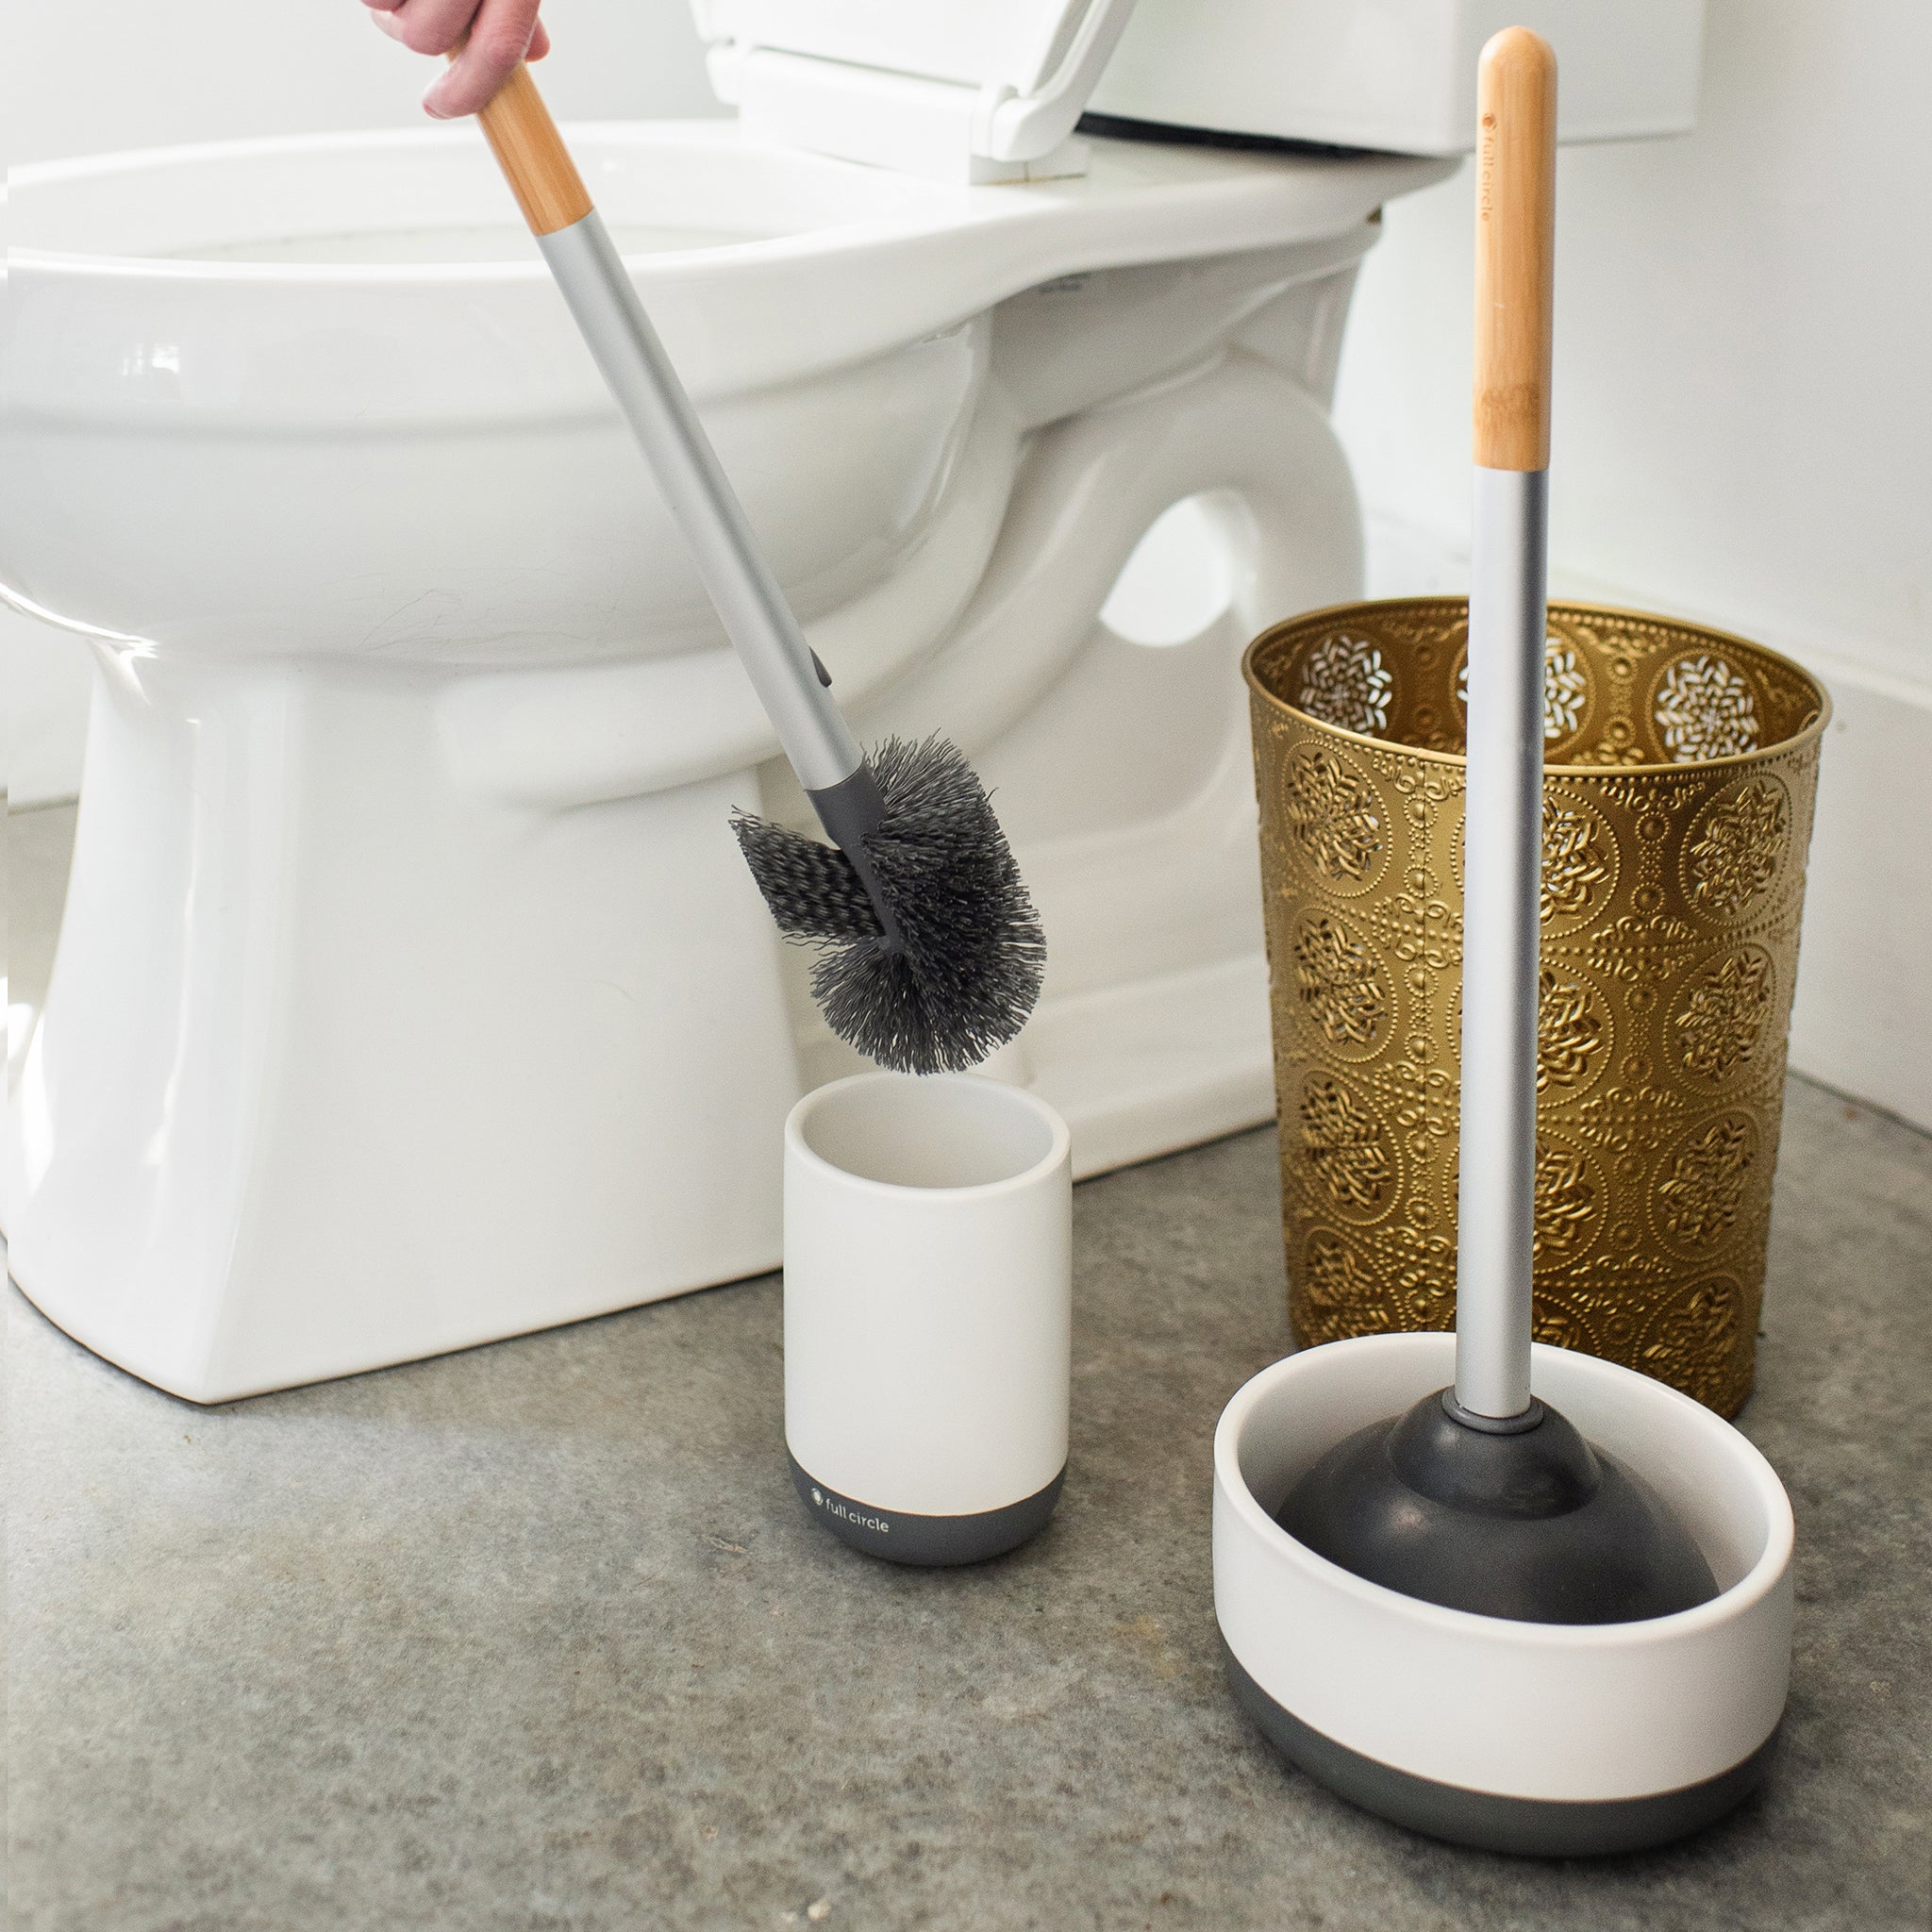 KSEND Toilet Brush Set with Caddy - White, Deep Cleaning Toilet